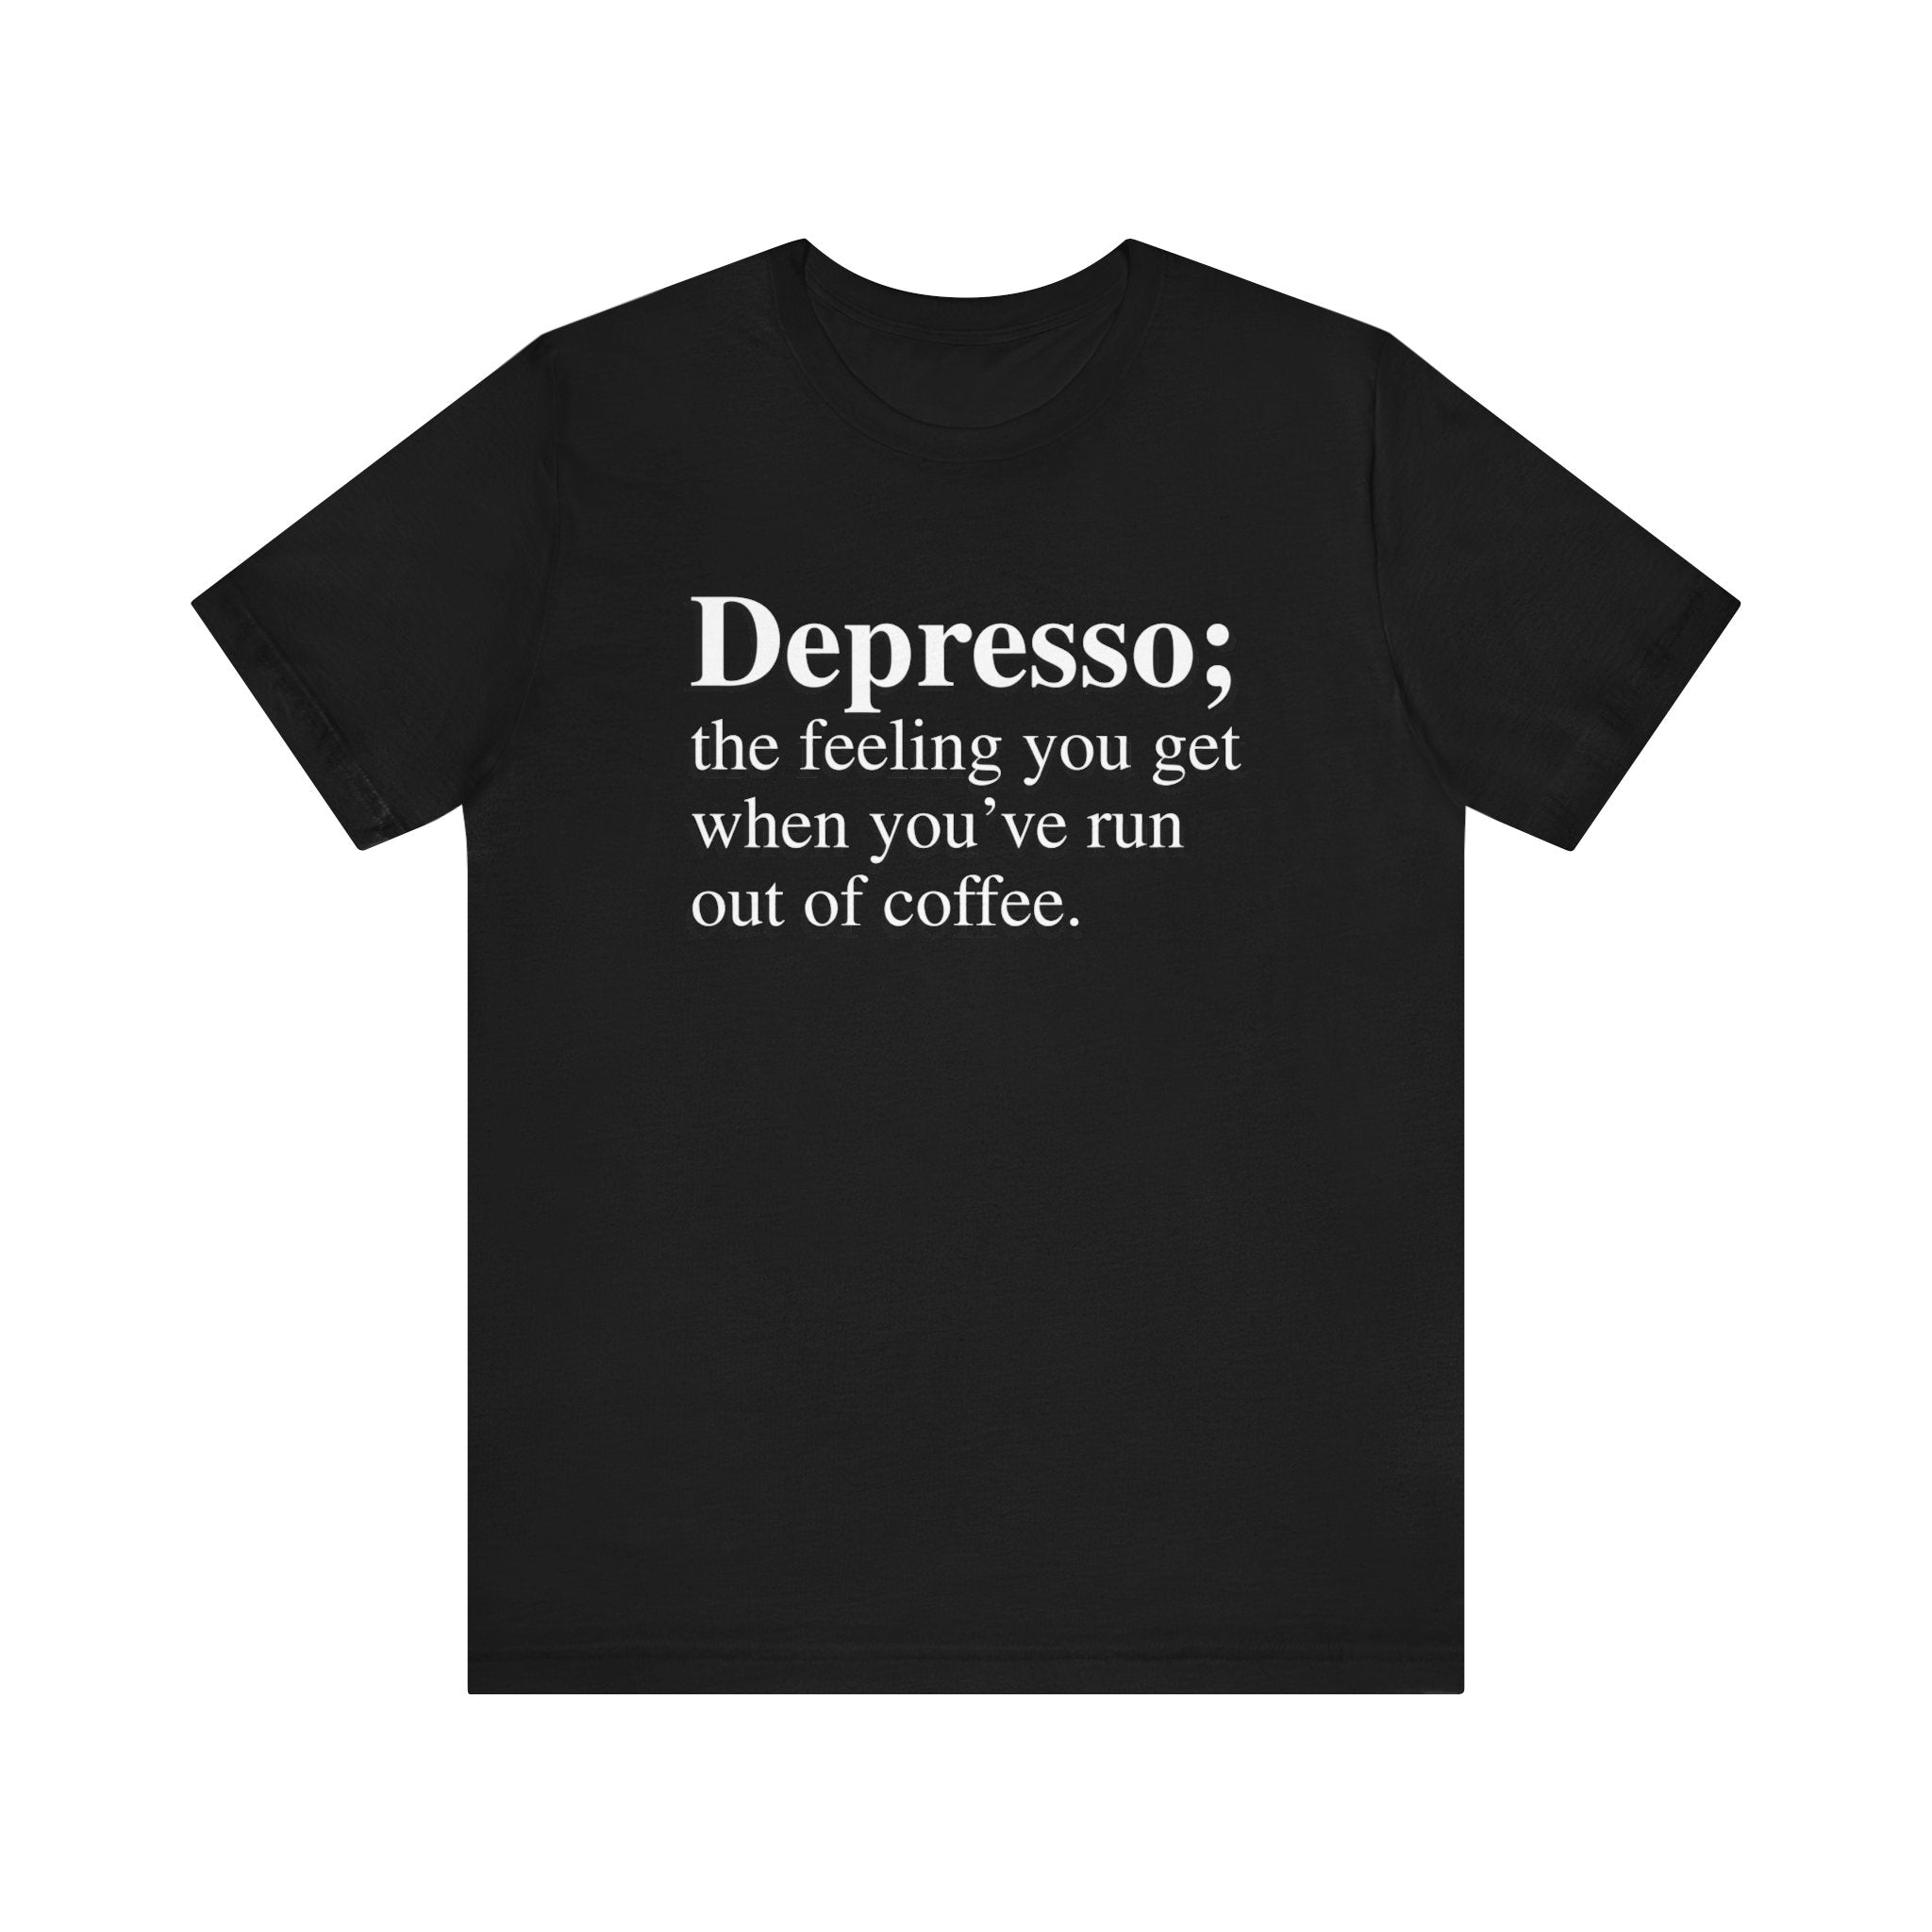 Black soft cotton Depresso T-Shirt with white text reading "depresso; the feeling you get when you’ve run out of coffee.